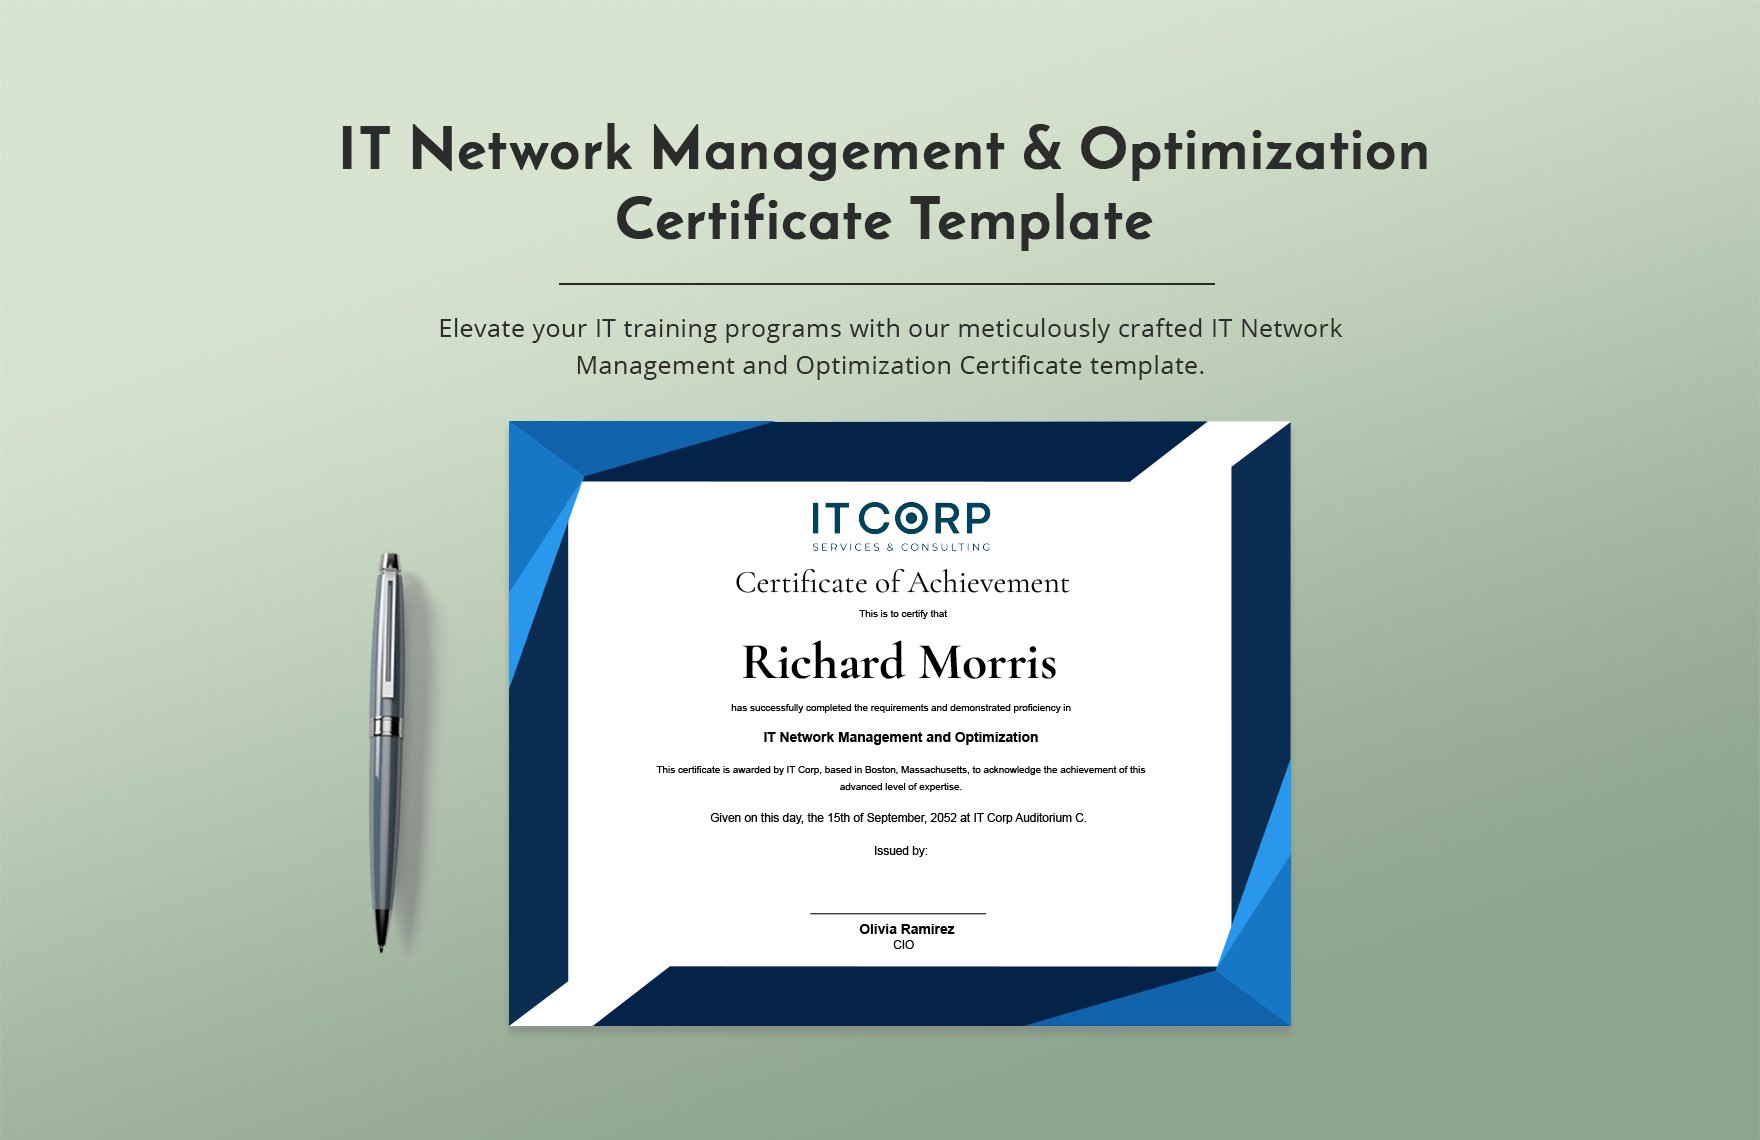 IT Network Management & Optimization Certificate Template in Word, Illustrator, PSD